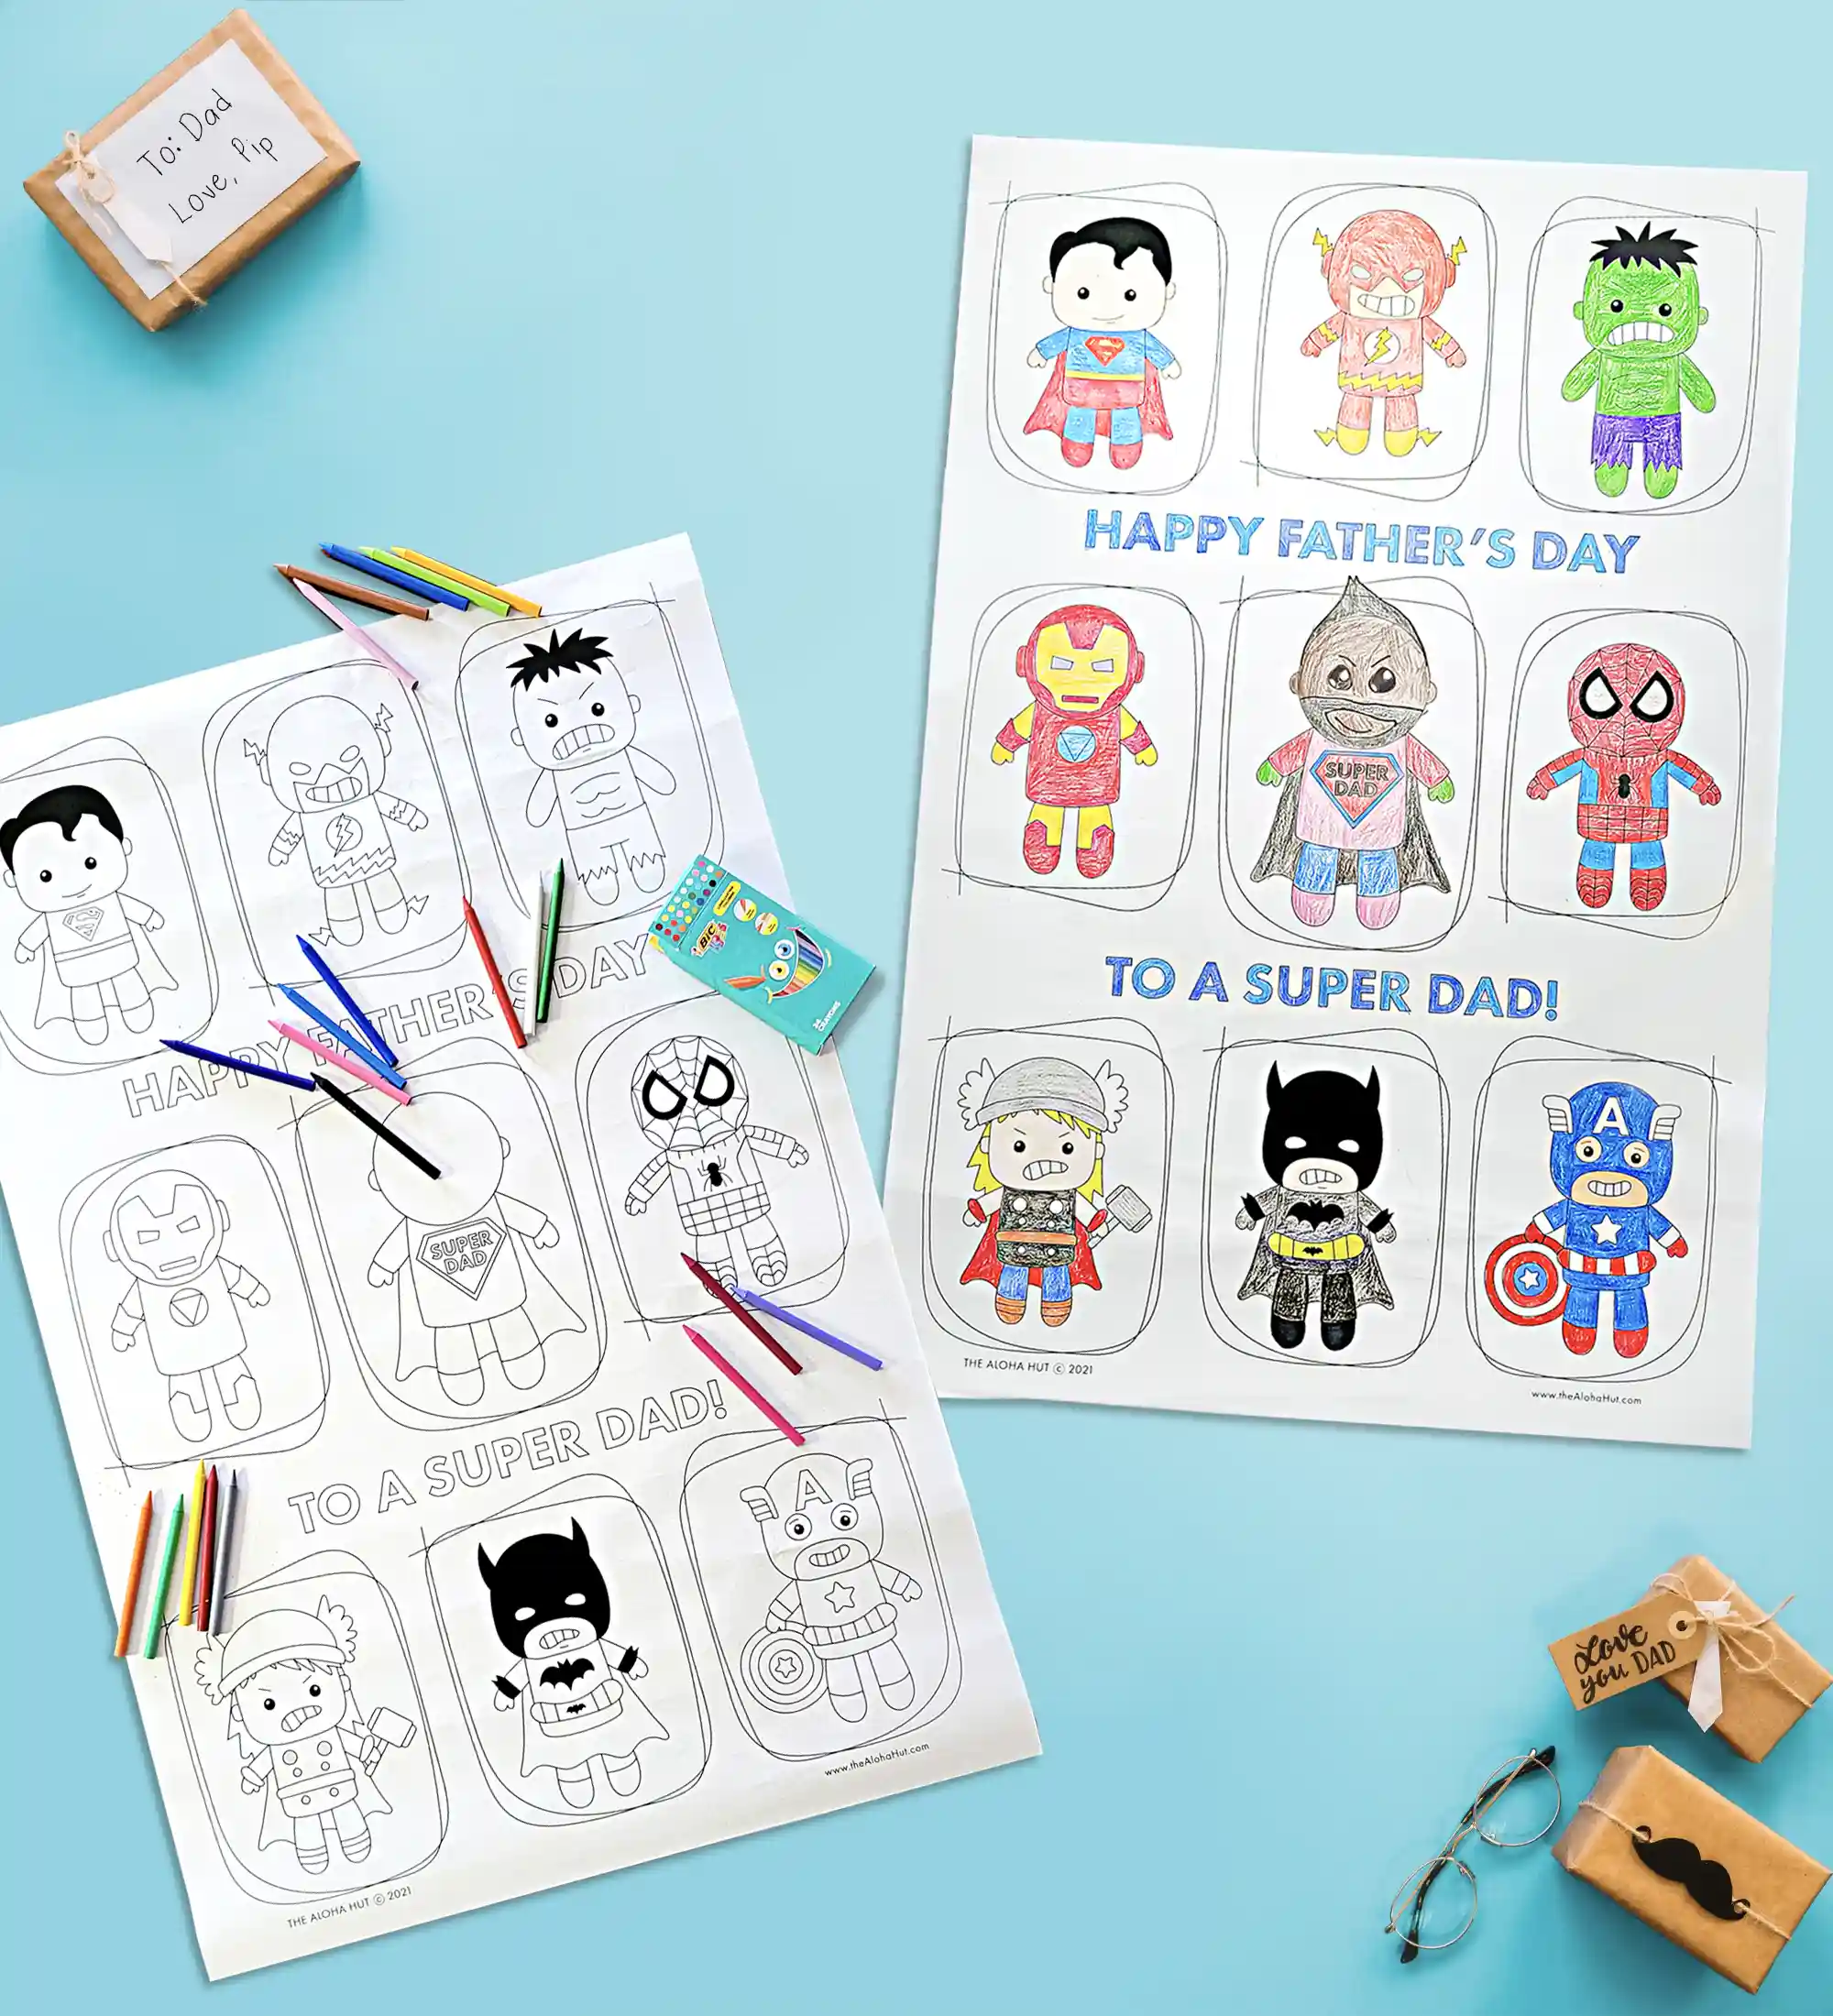 Father's Day giant coloring poster for dad that is superhero themed. Say Happy Father's Day to dad with this fun superhero coloring poster. Includes a spot to draw a dad as a superhero. Fun and easy gift for the kids to give dad this Father's Day.